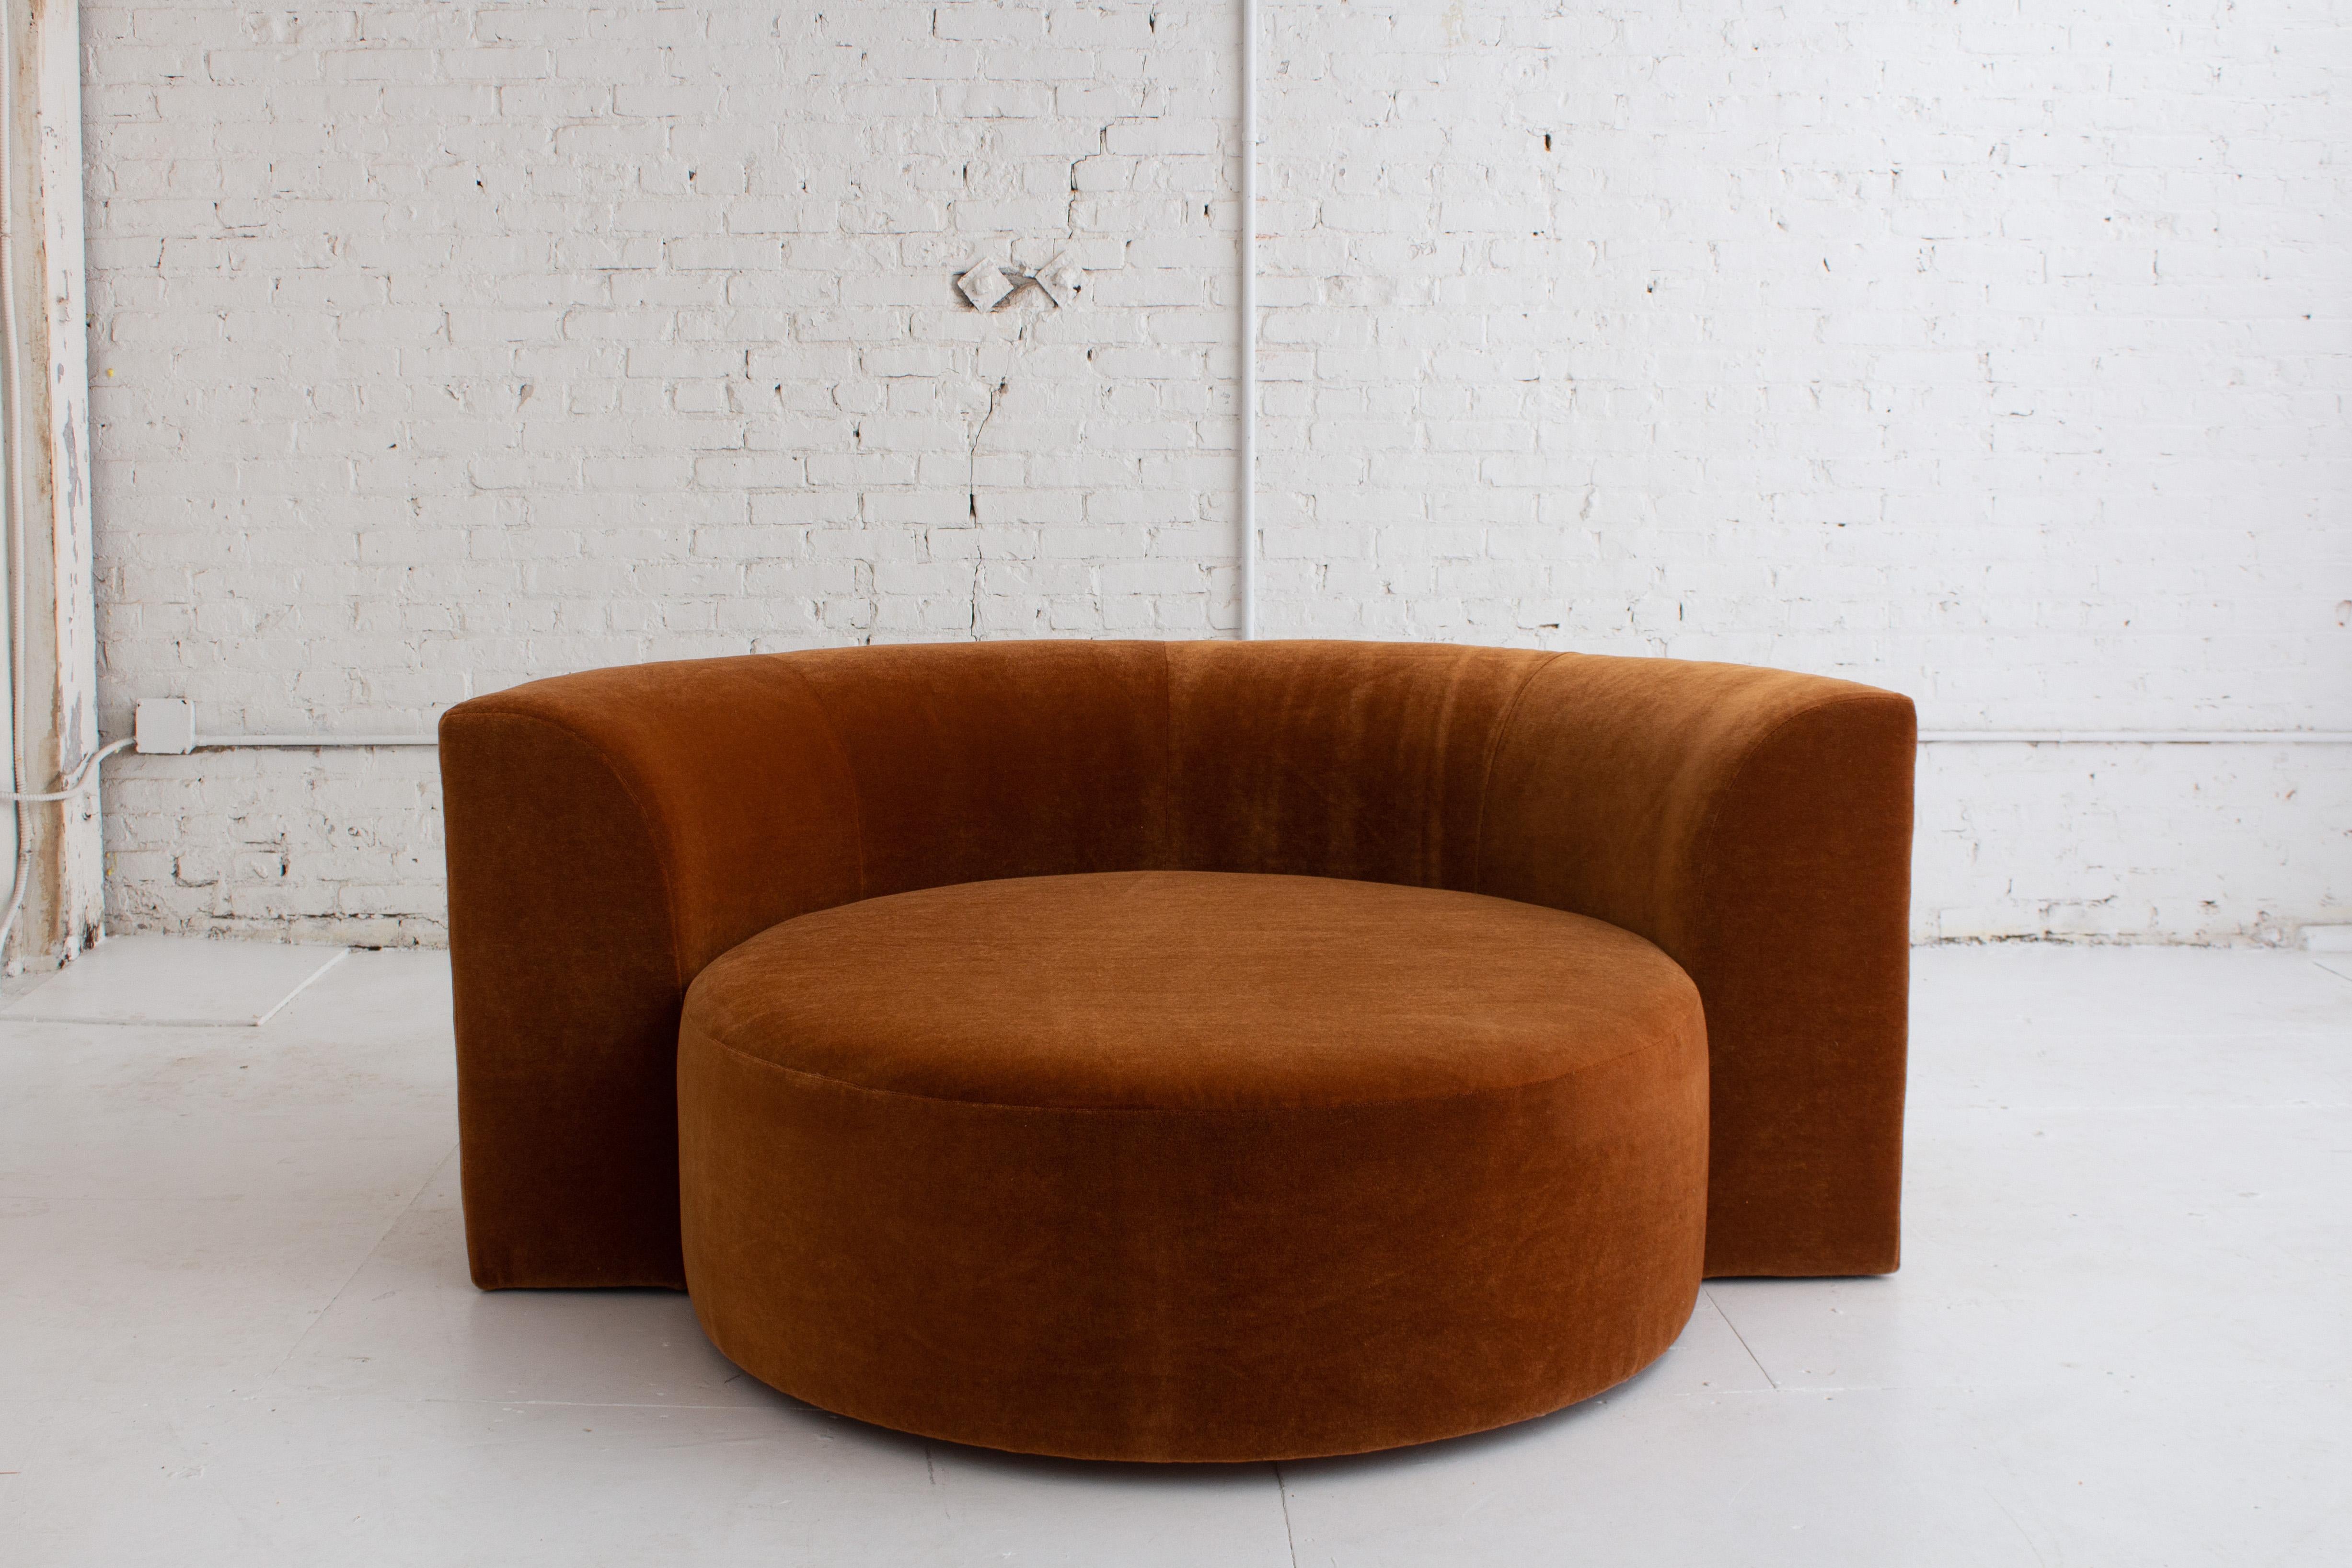 Circular Chaise Lounge in Mohair by Roger Rougier In Good Condition For Sale In Brooklyn, NY